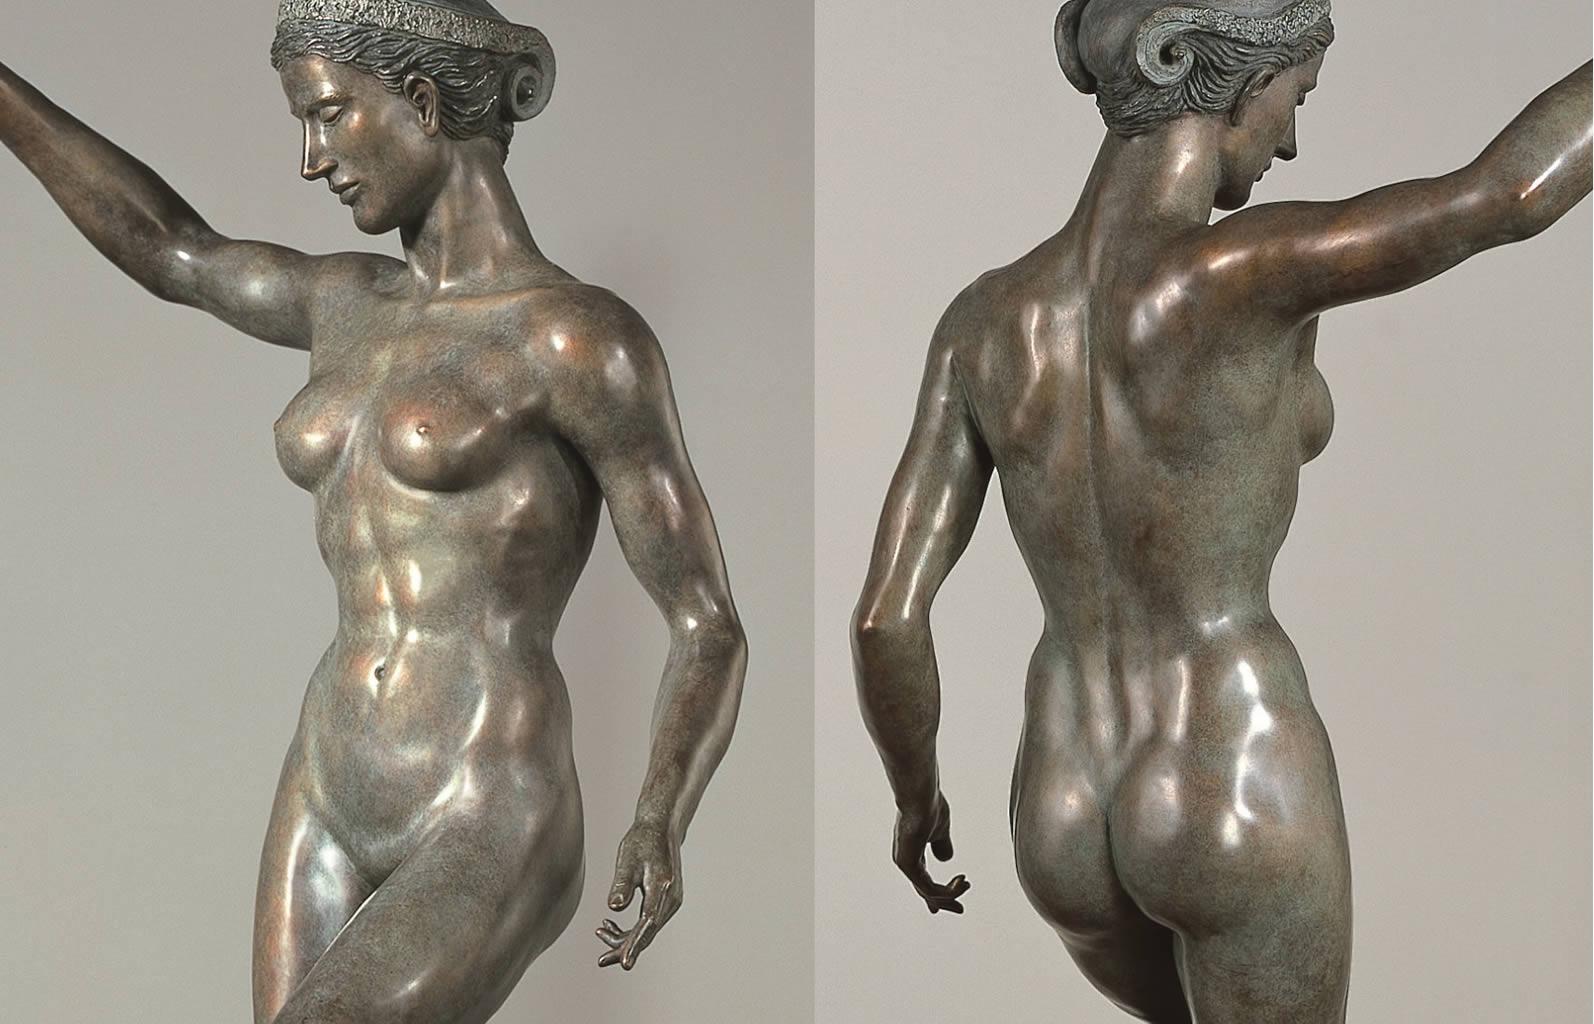 Ekstase Ectasy Bronze Sculpture Contemporary Classic Art . Including pedestal 194 cm.

The sculptures of Margot Homan (1956, Oss) show a perfect command of the old craft of modelling and sculpting, with which she continually develops an age old